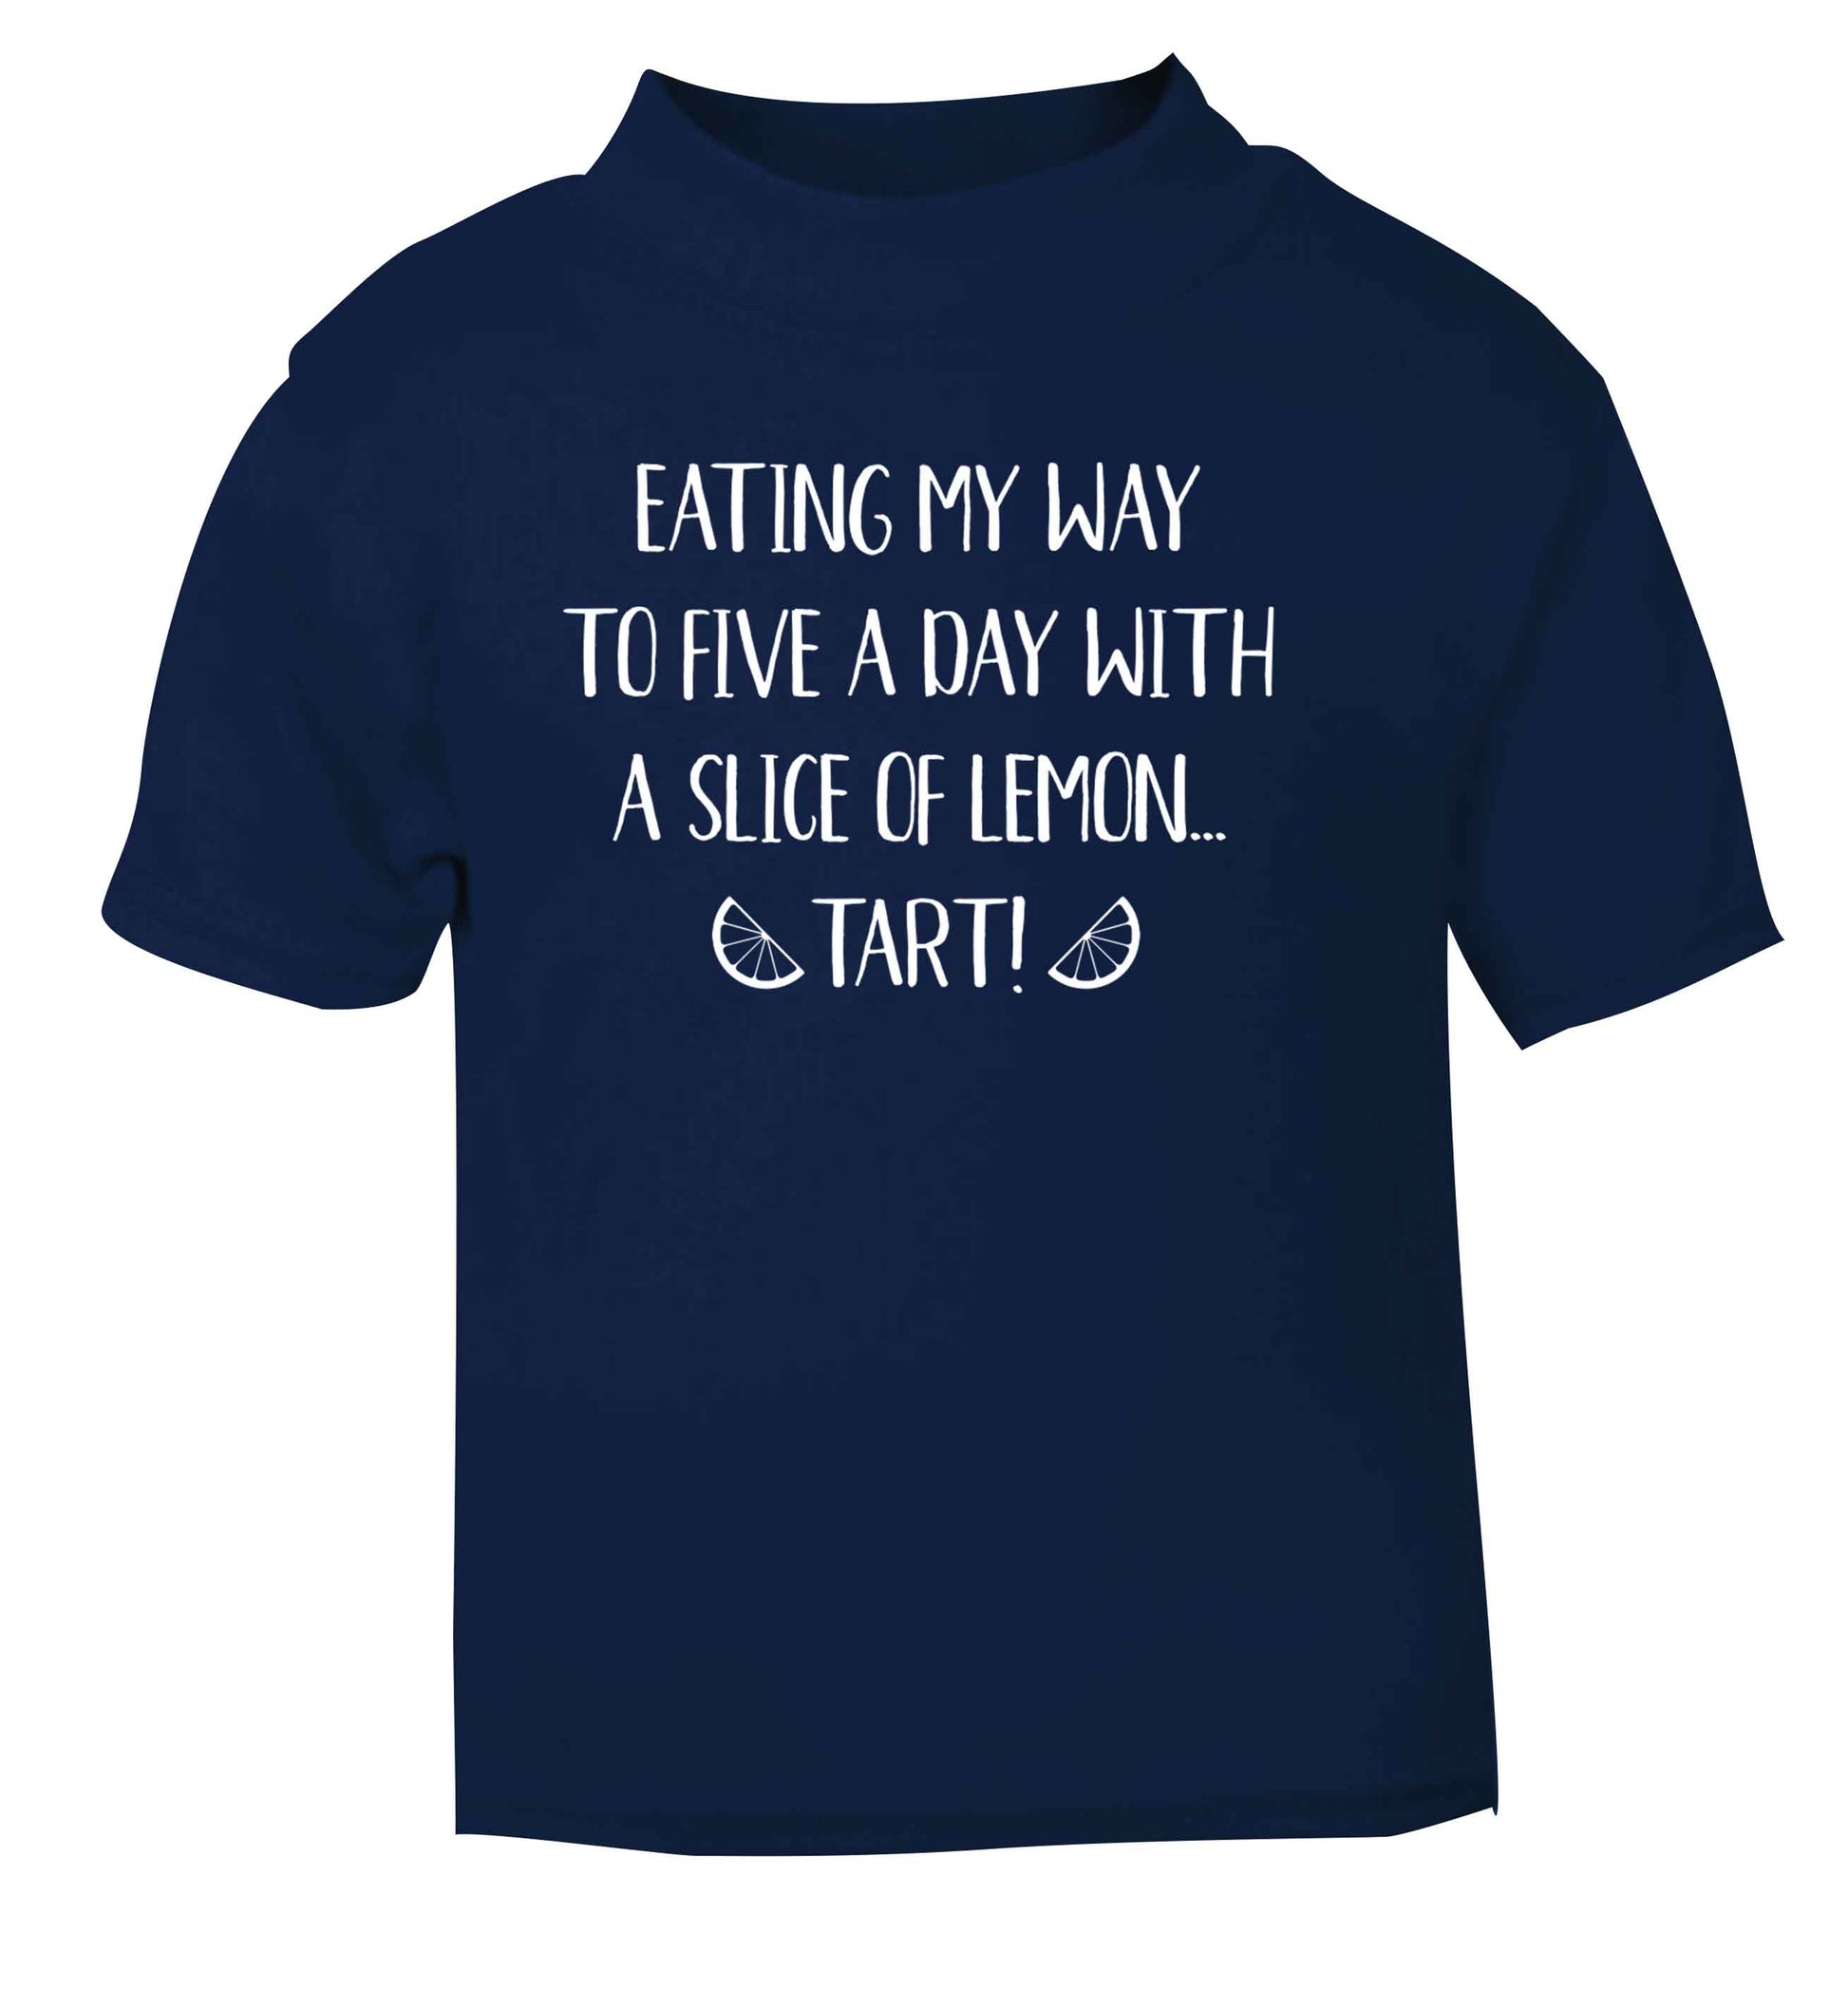 Eating my way to five a day with a slice of lemon tart navy Baby Toddler Tshirt 2 Years